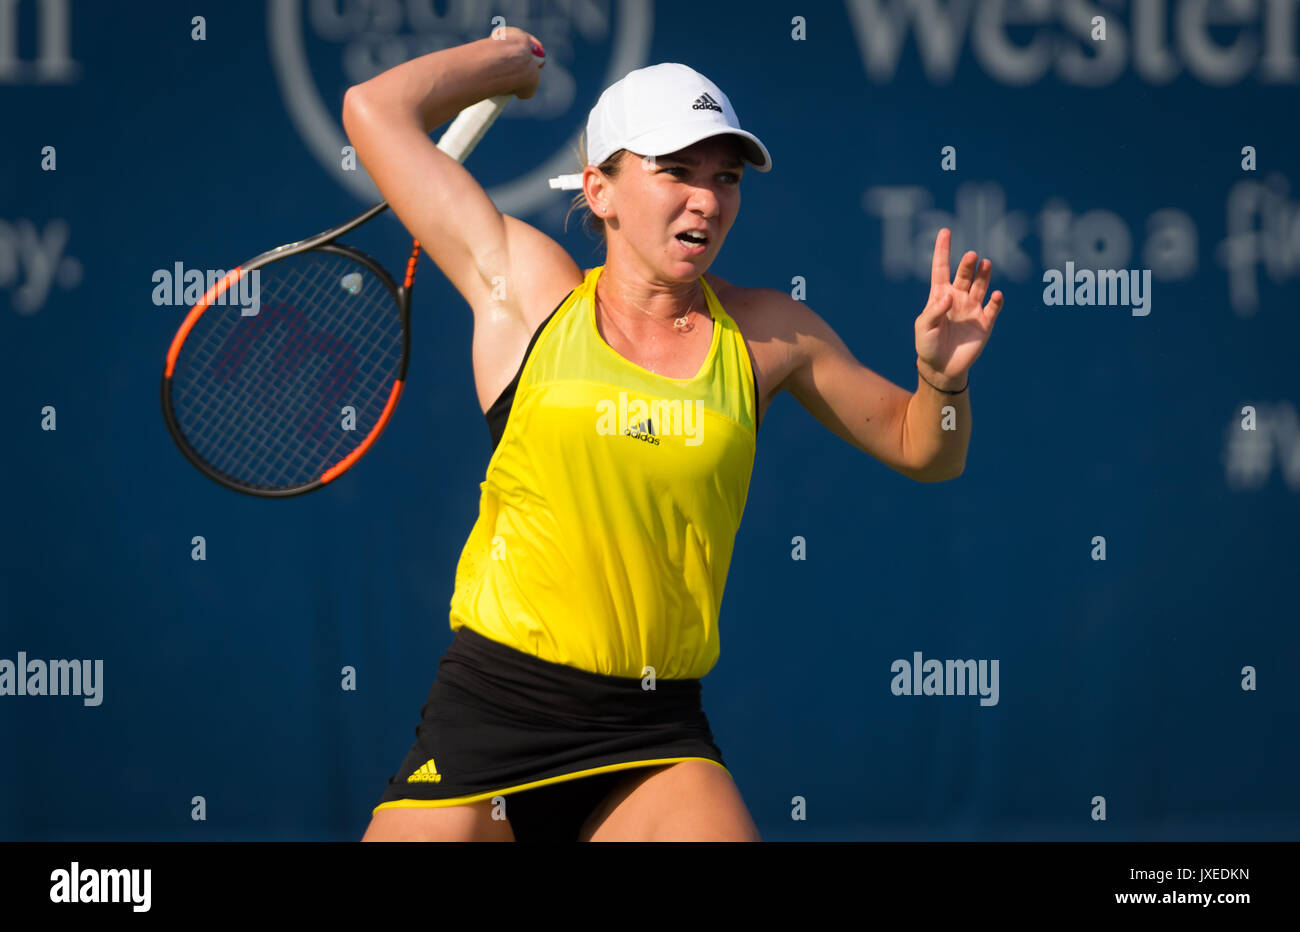 Cincinnati, United States. 15 August, 2017. Simona Halep of Romania at the  2017 Western & Southern Open WTA Premier 5 tennis tournament Credit:  Jimmie48 Photography/Alamy Live News Stock Photo - Alamy